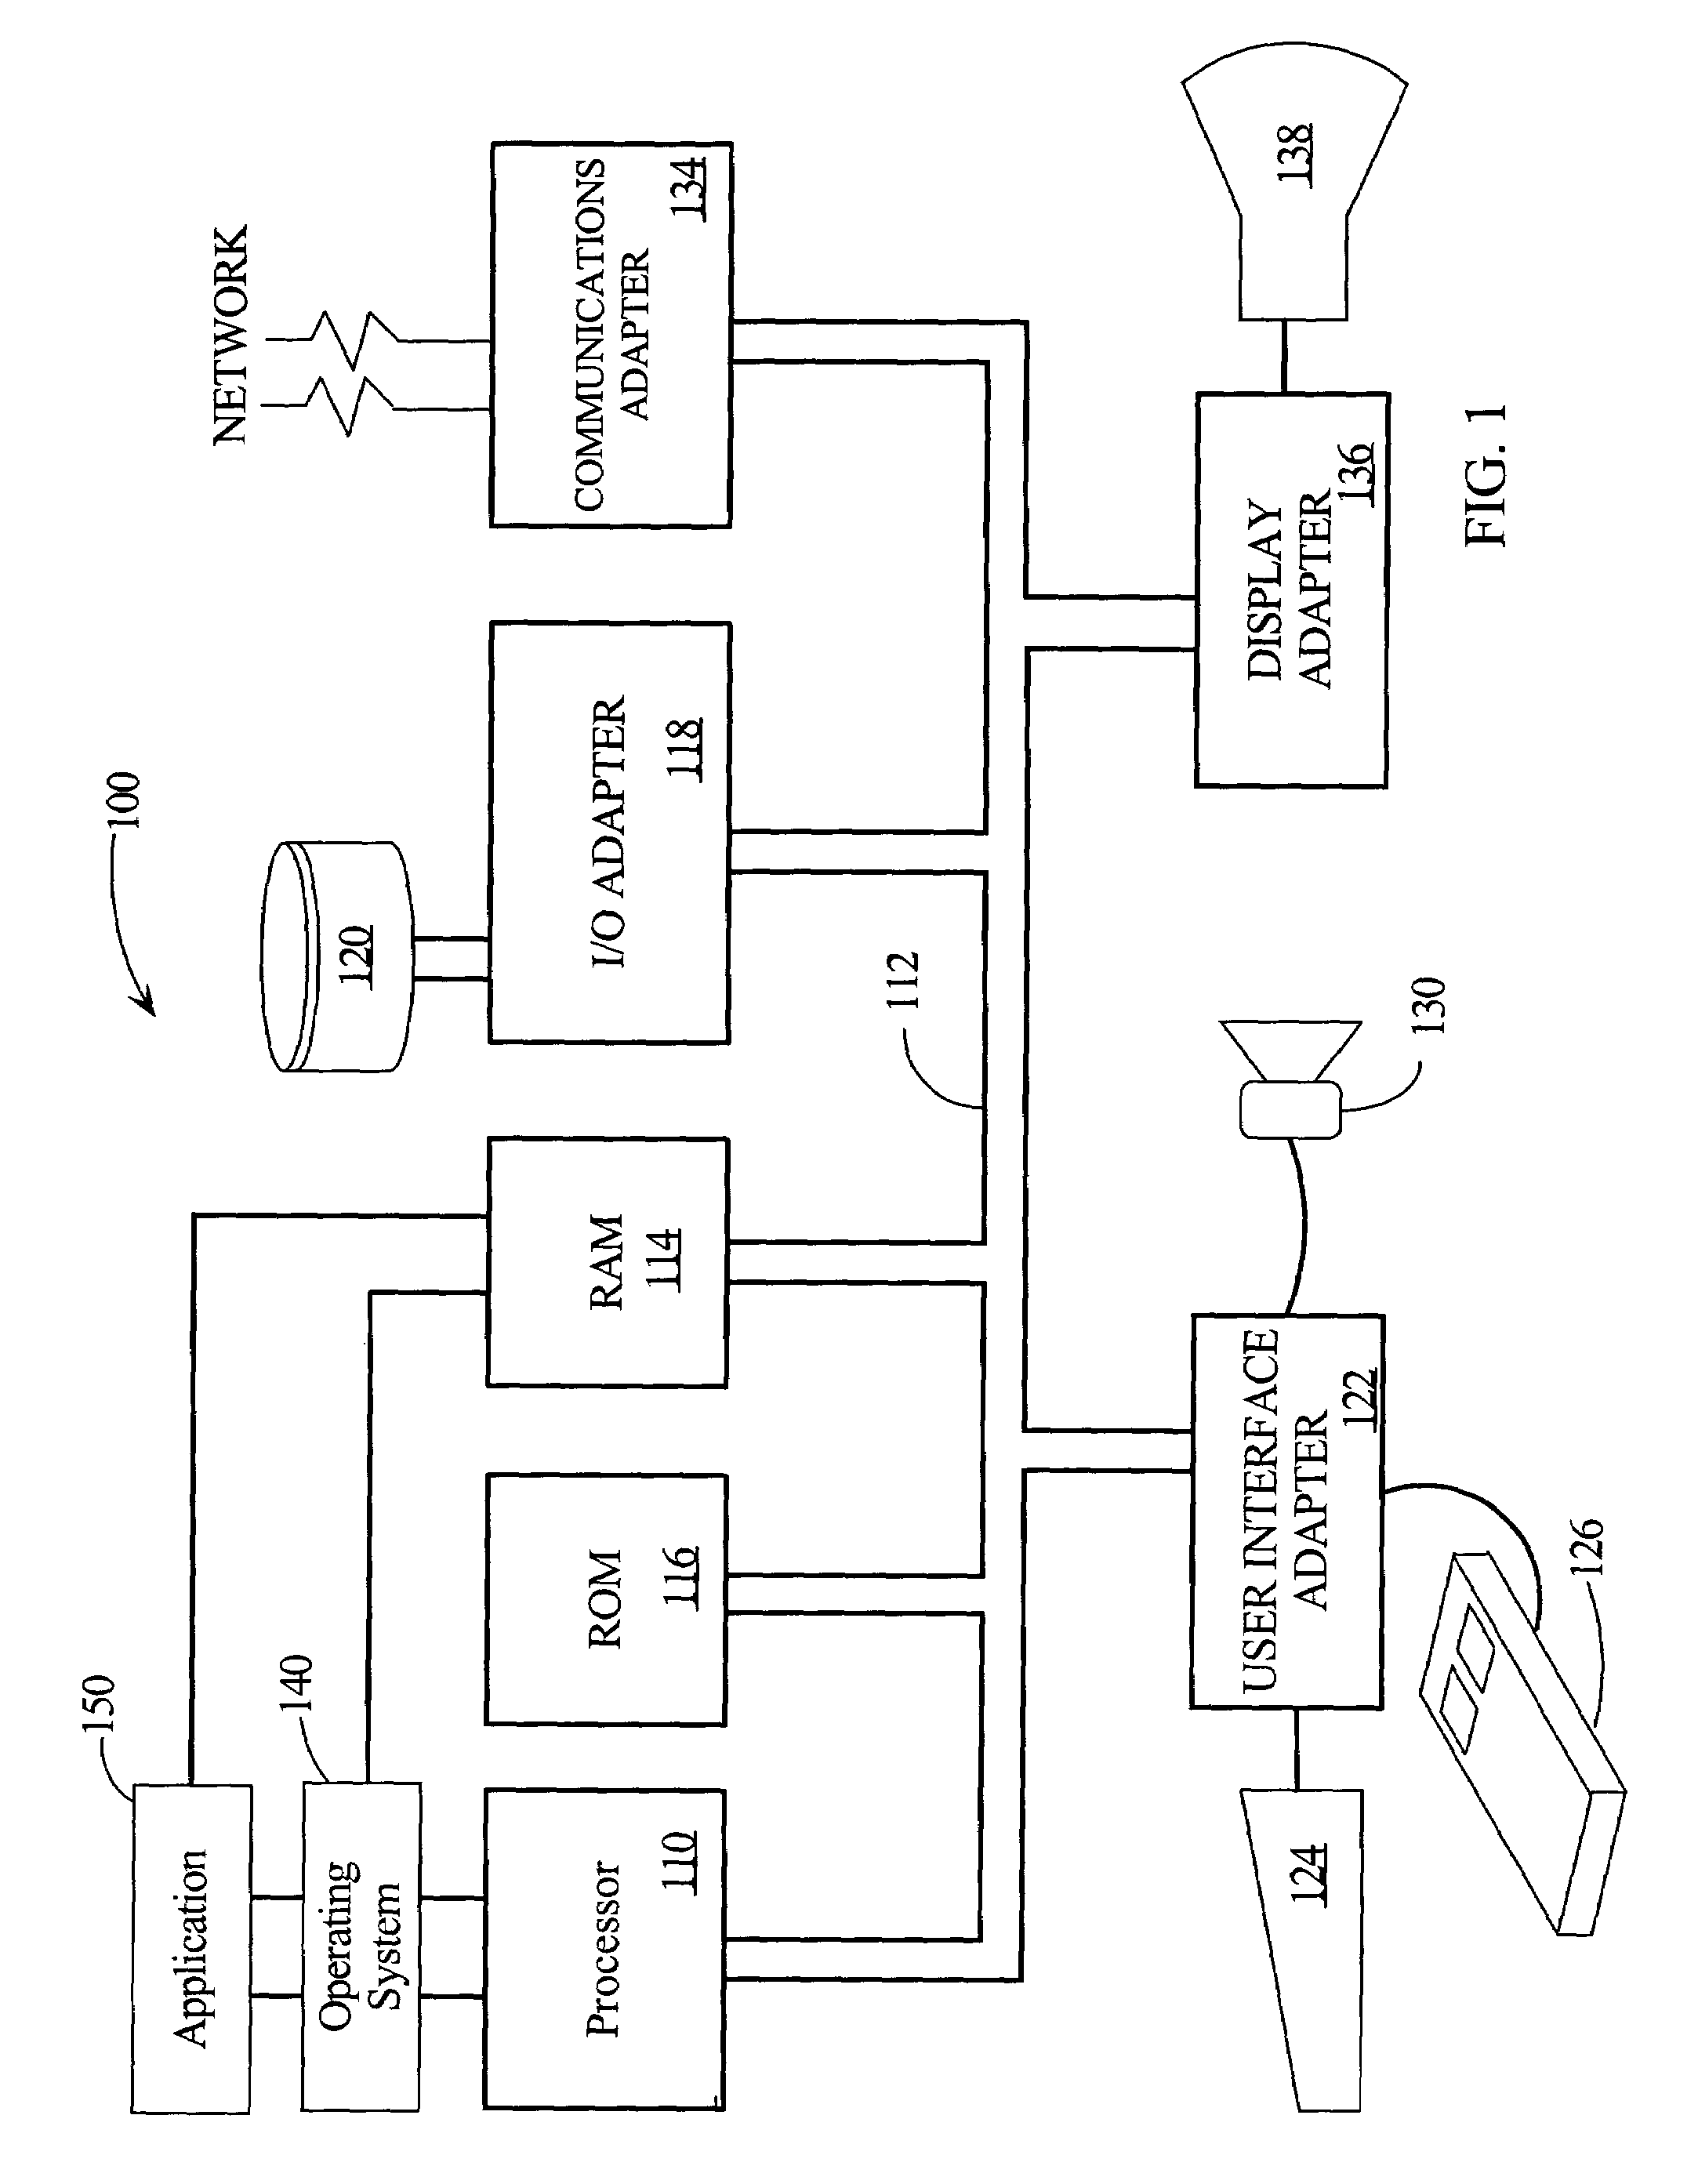 Mechanism for avoiding check stops in speculative accesses while operating in real mode